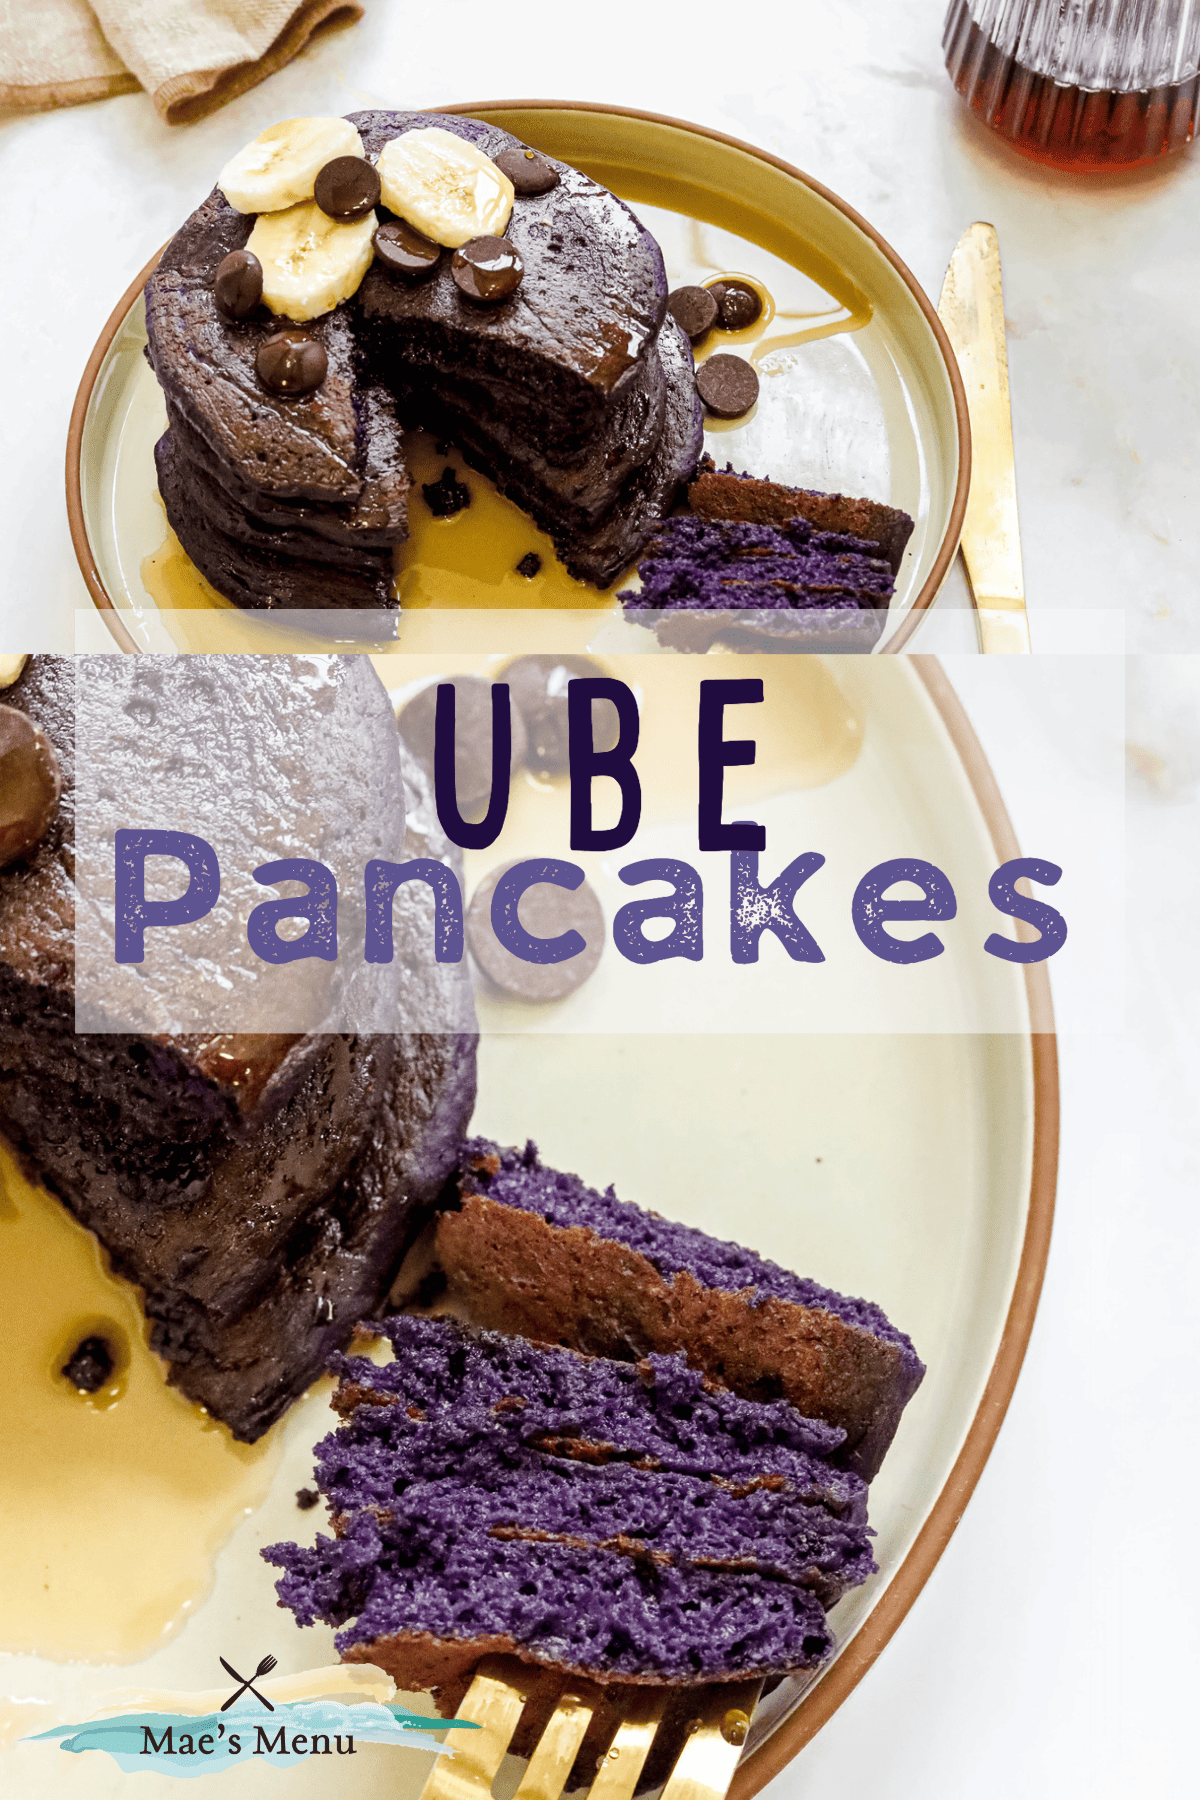 A pinterest pin for ube pancakes with an overhead shot of a plate of pancakes and an up-close shot of a forkful of pancakes.